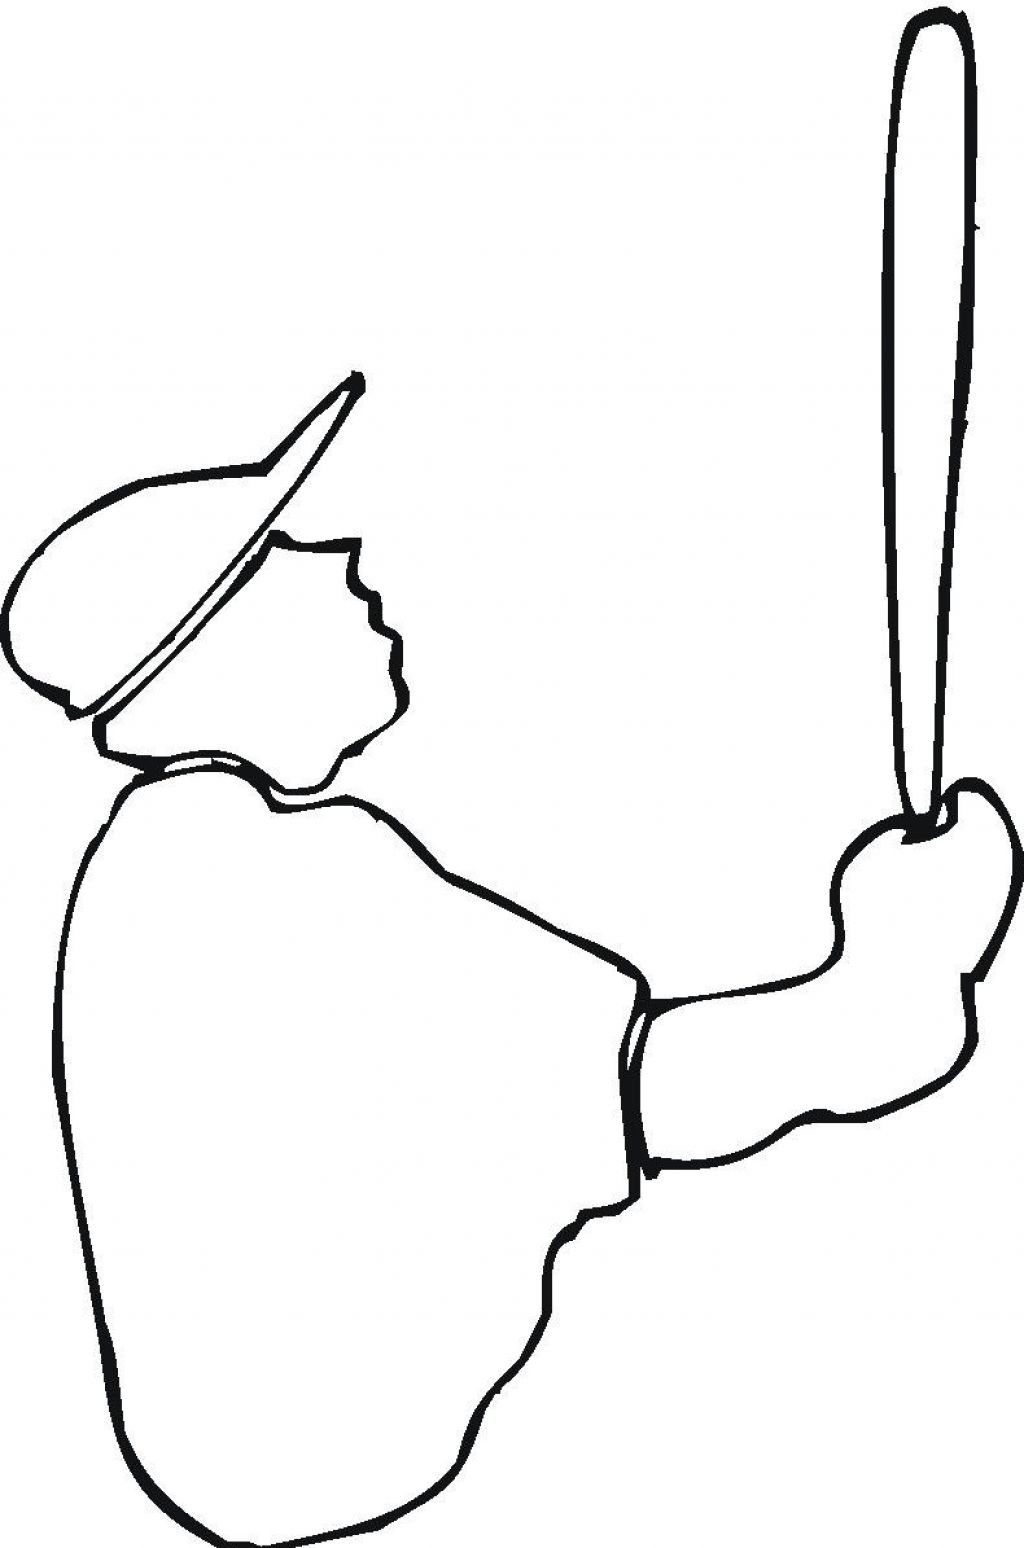 Person Outline Coloring Page - ClipArt Best